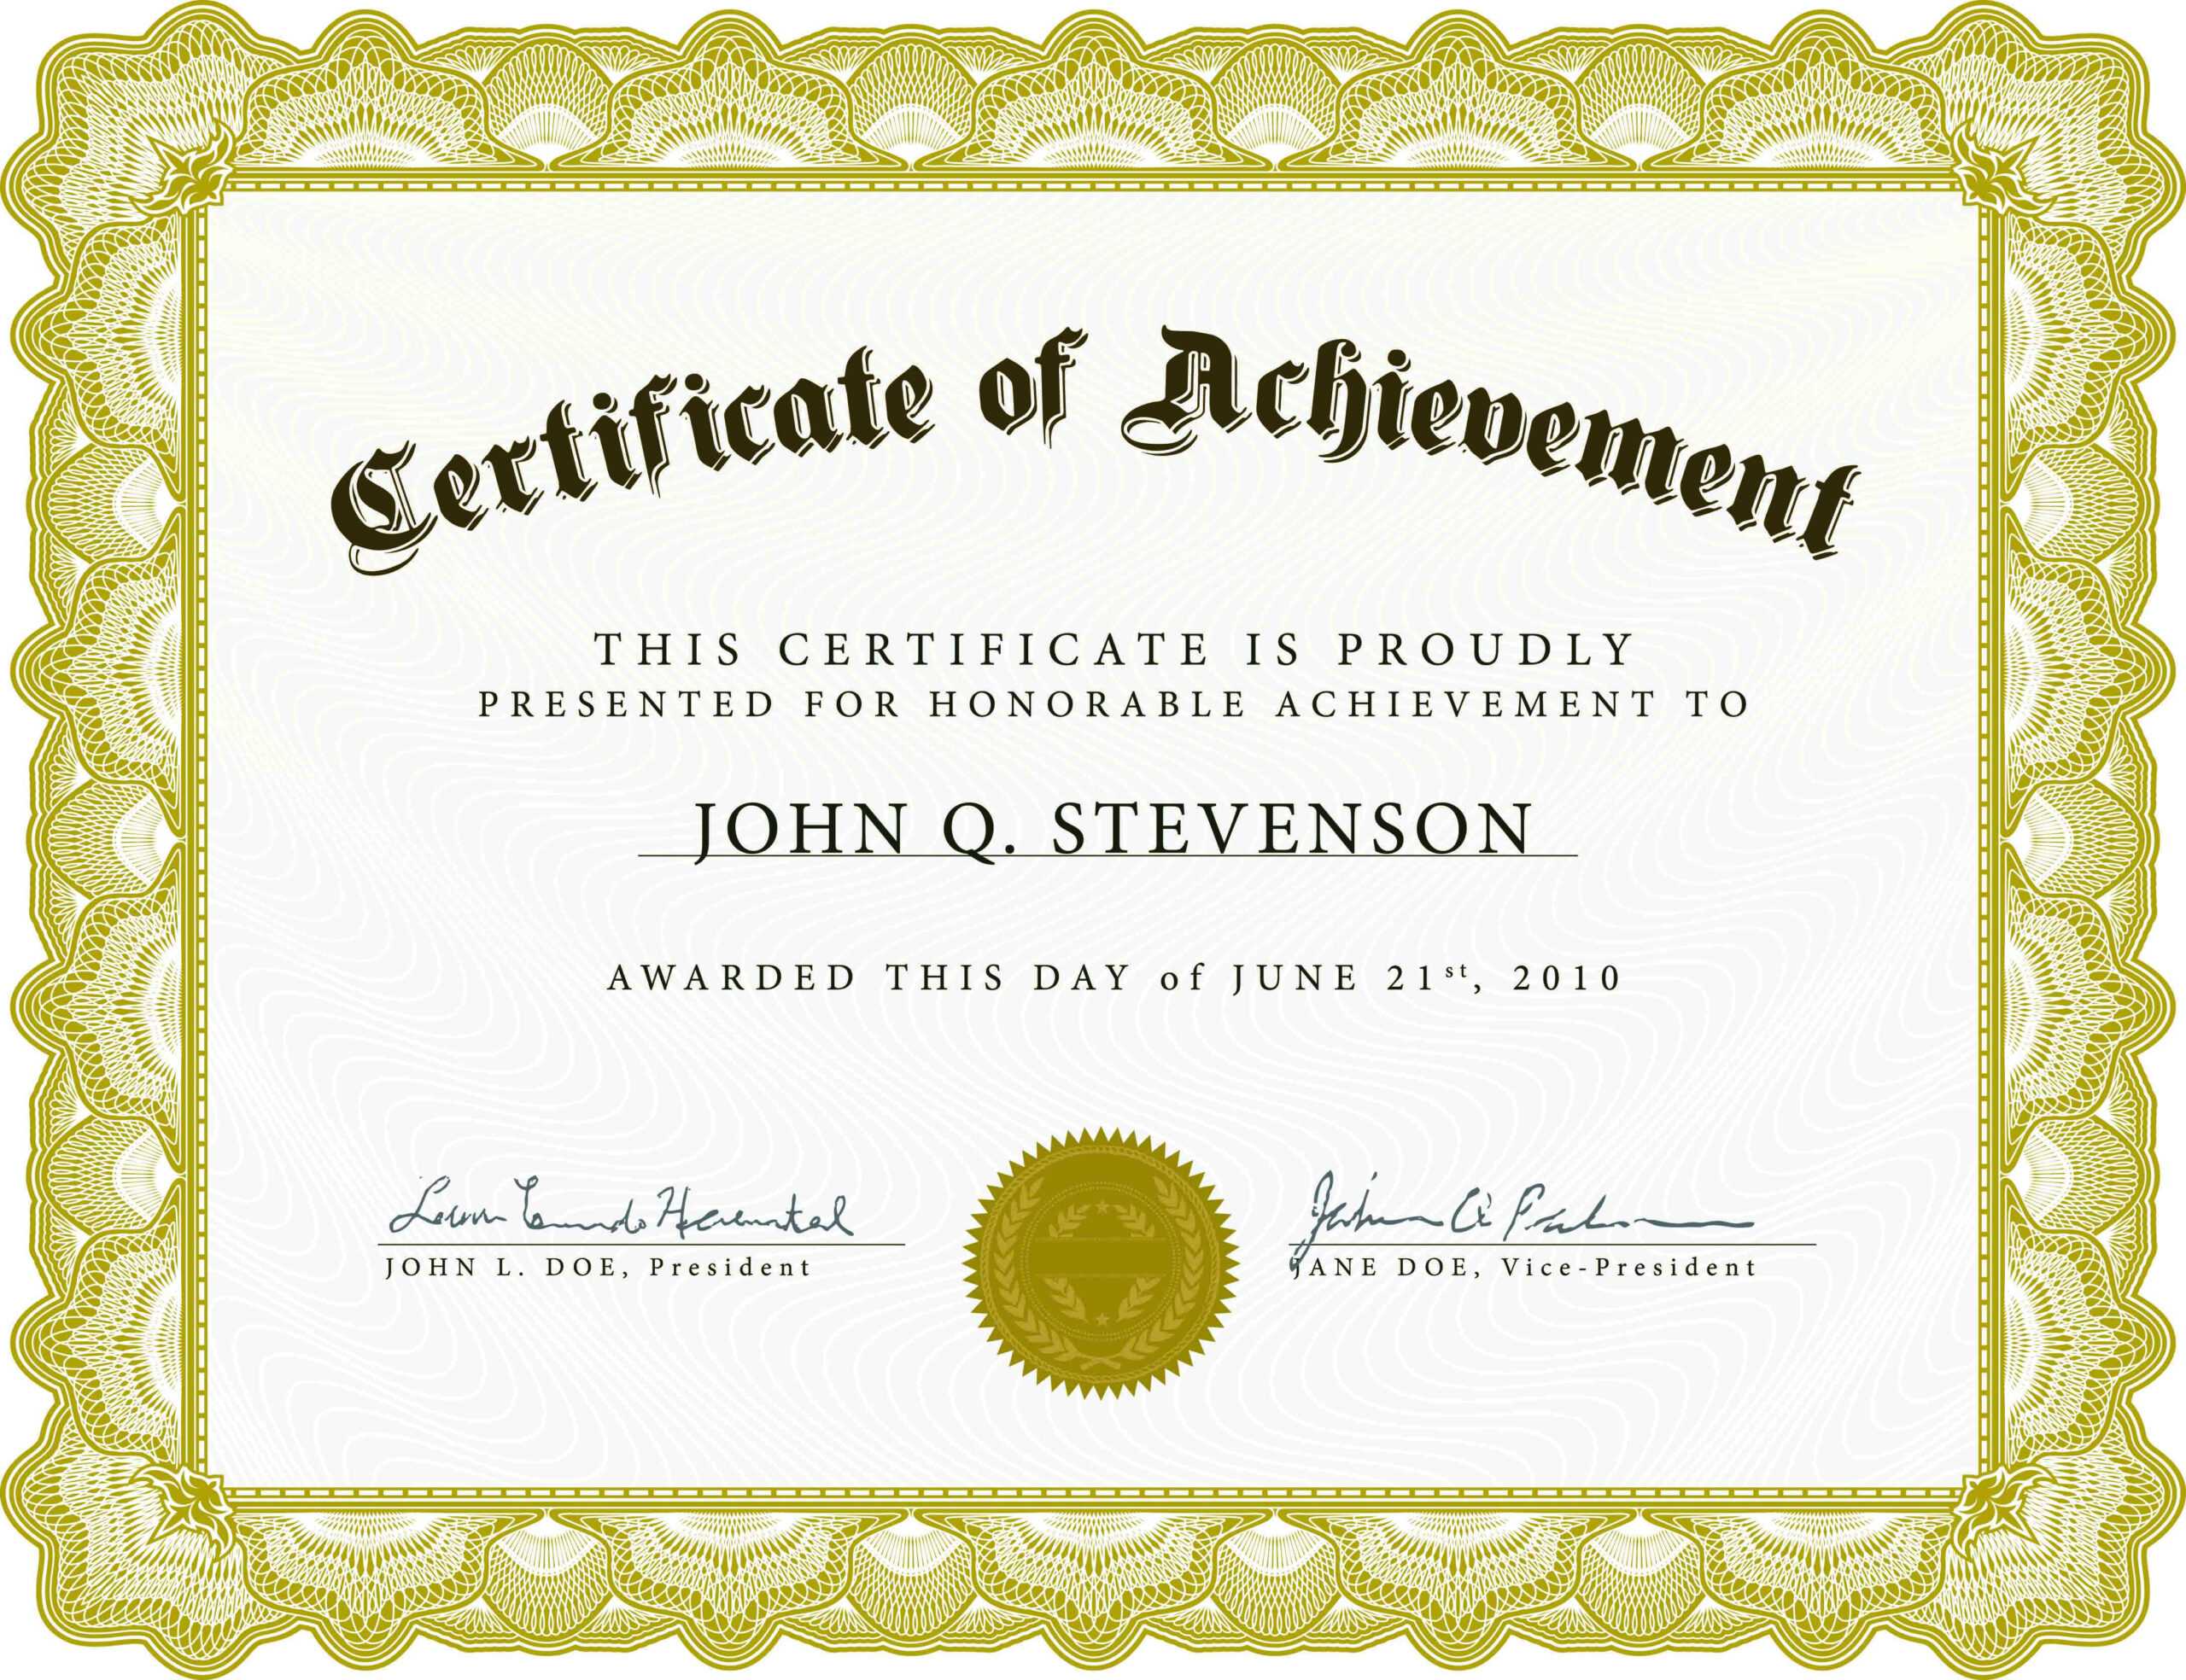 Diploma Certificate Format In Word - Calep.midnightpig.co In Free Printable Graduation Certificate Templates